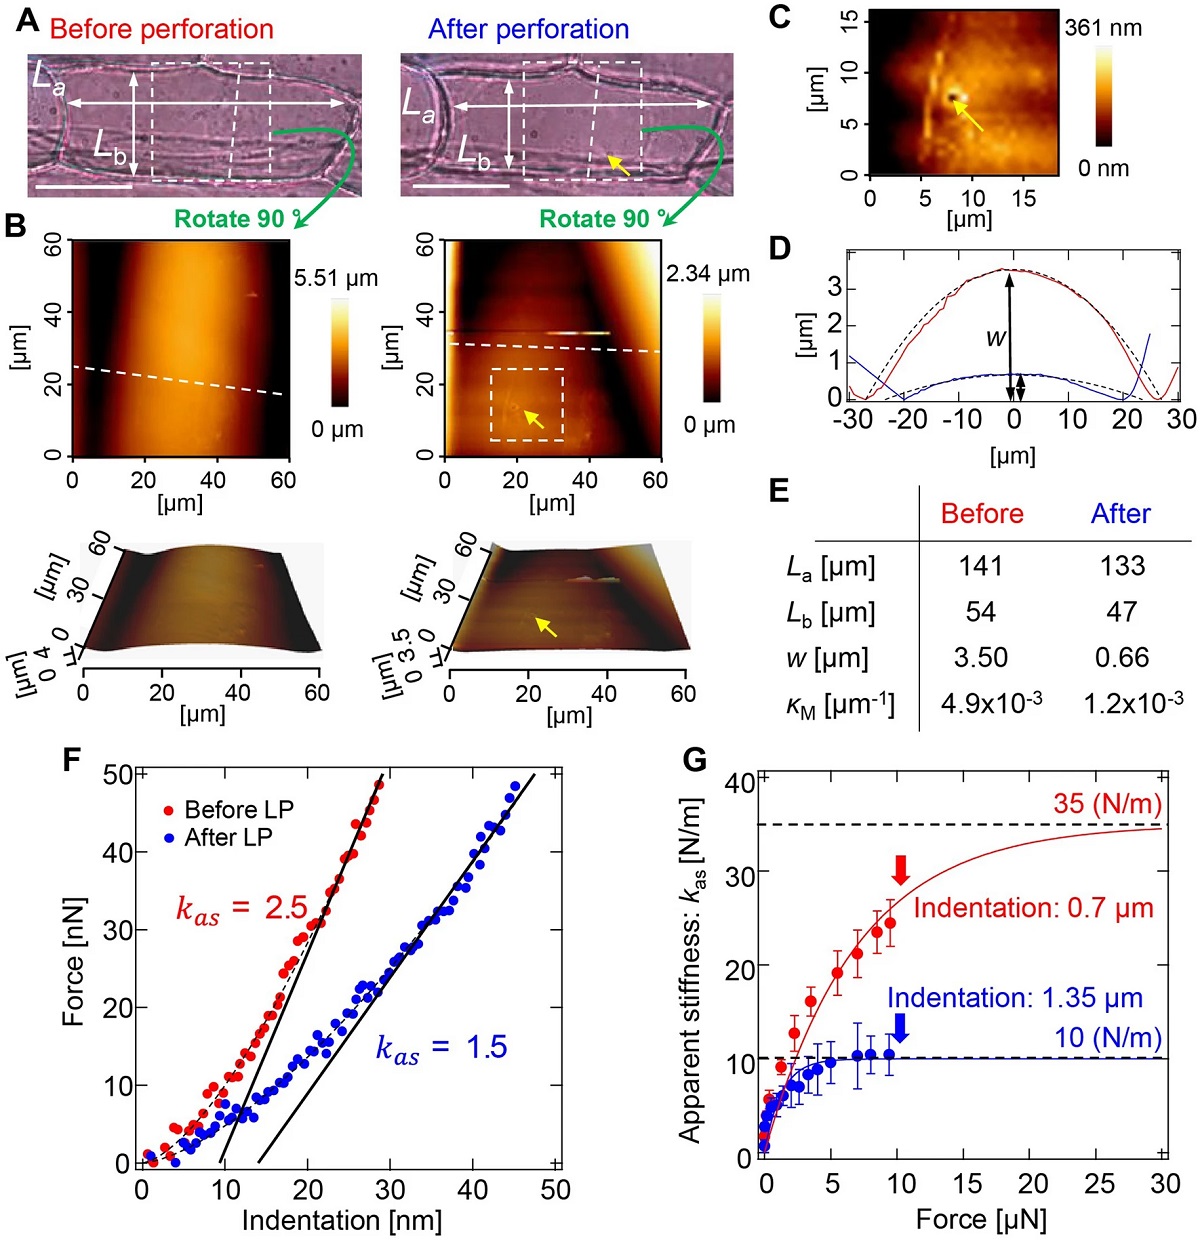 Fig-3-S-Tsugawa-et-al-2022-Elastic-shell-theory-for-plant-cell-wall-stiffness-reveals-contributions-of-cell-wall-elasticity-and-turgor-pressure-in-AFM-measurement NANOSENSORS Sphere-AFM probes SD-Sphere-NCH-S from the NANOSENSORS™ Special Developments List were used for the force-indentation curve measurements with atomic force microscopy